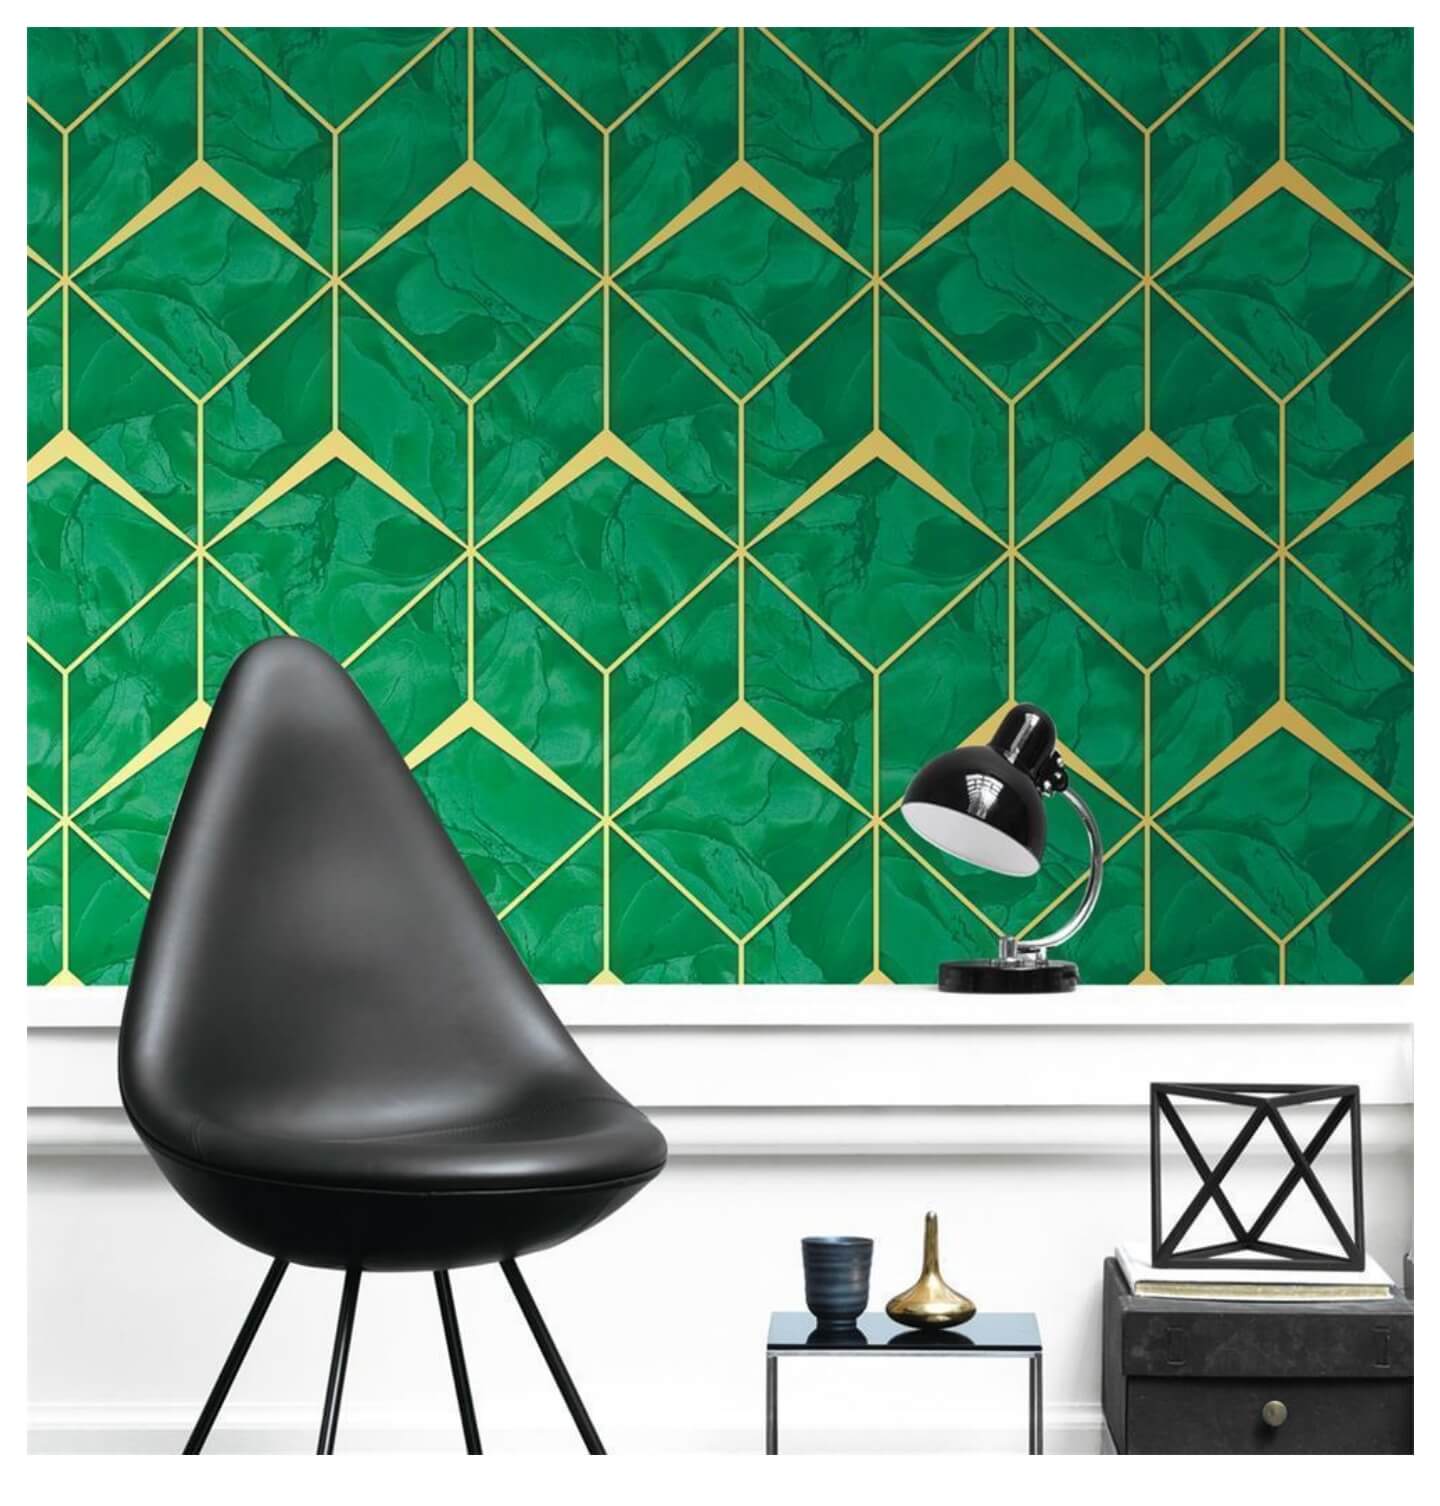 Beautiful Color 3D Design Wallpaper Better choice For Living Area, Bedroom, kids room, Office Durable PVC Wallpapers (13)